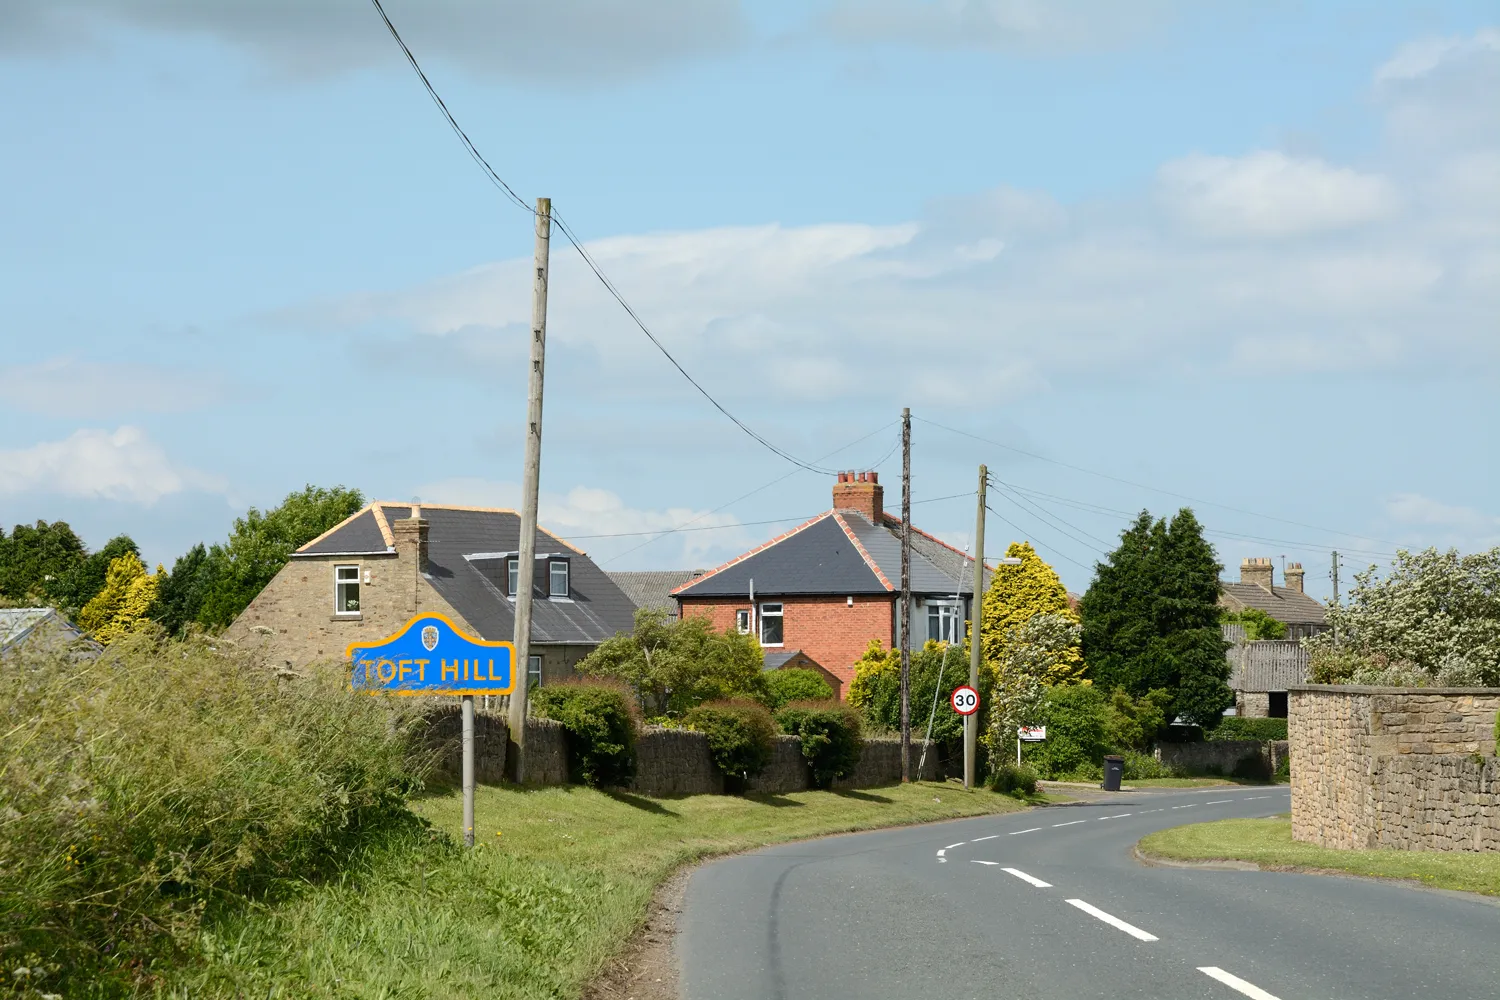 Photo showing: B6282 entering Toft Hill